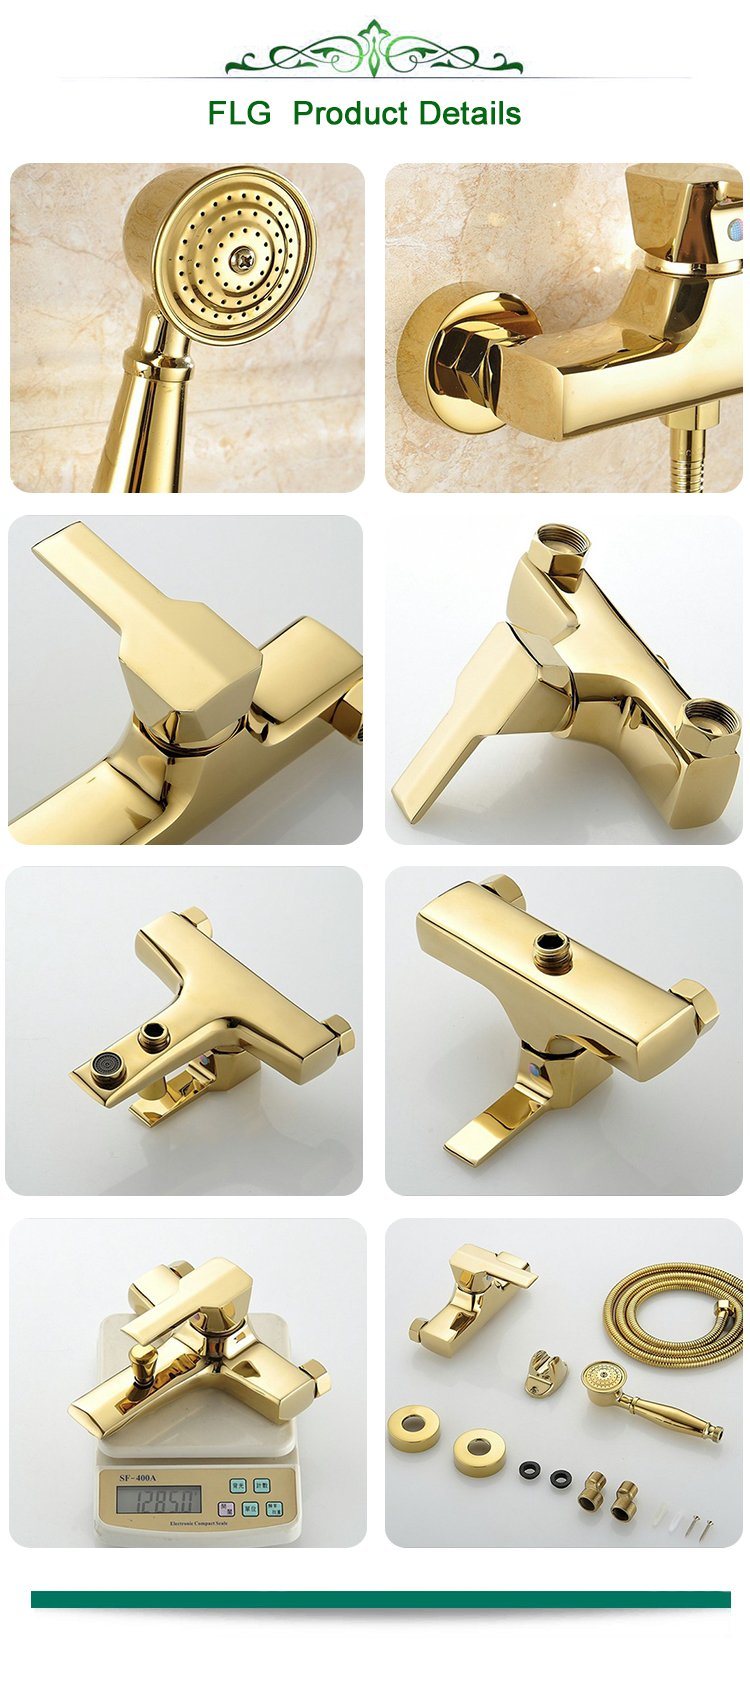 FLG Gold Plated Bathtub Faucet with Hand Shower Set